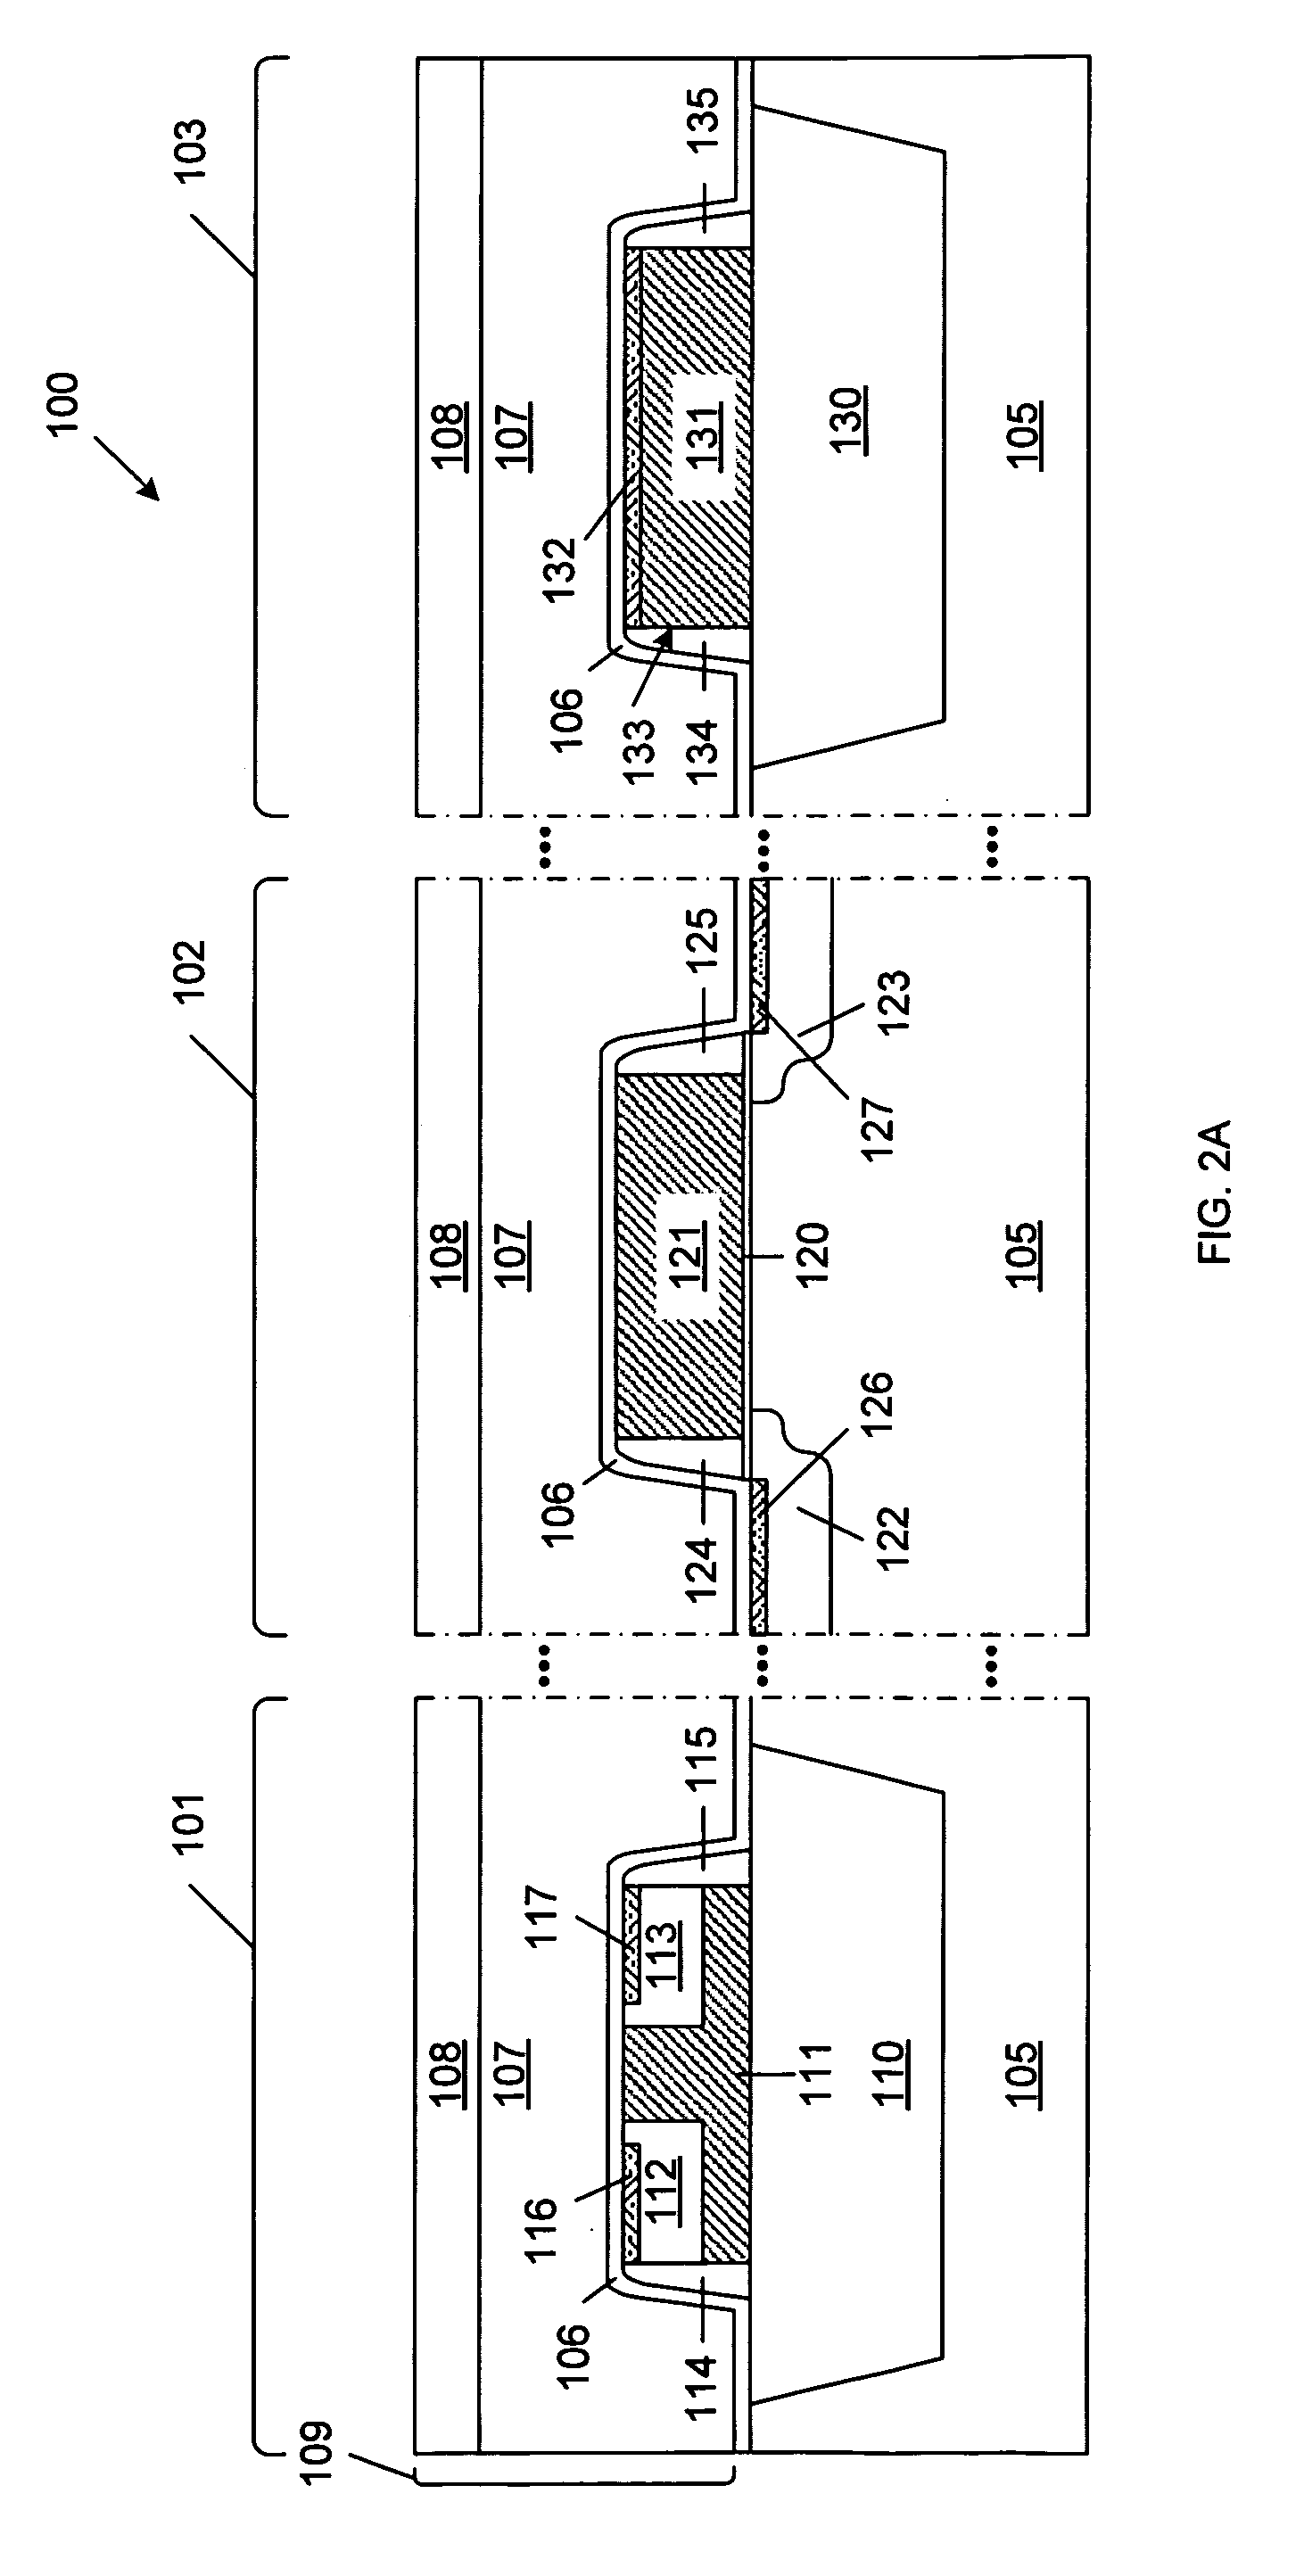 Method For Fabricating Capacitor Structures Using The First Contact Metal